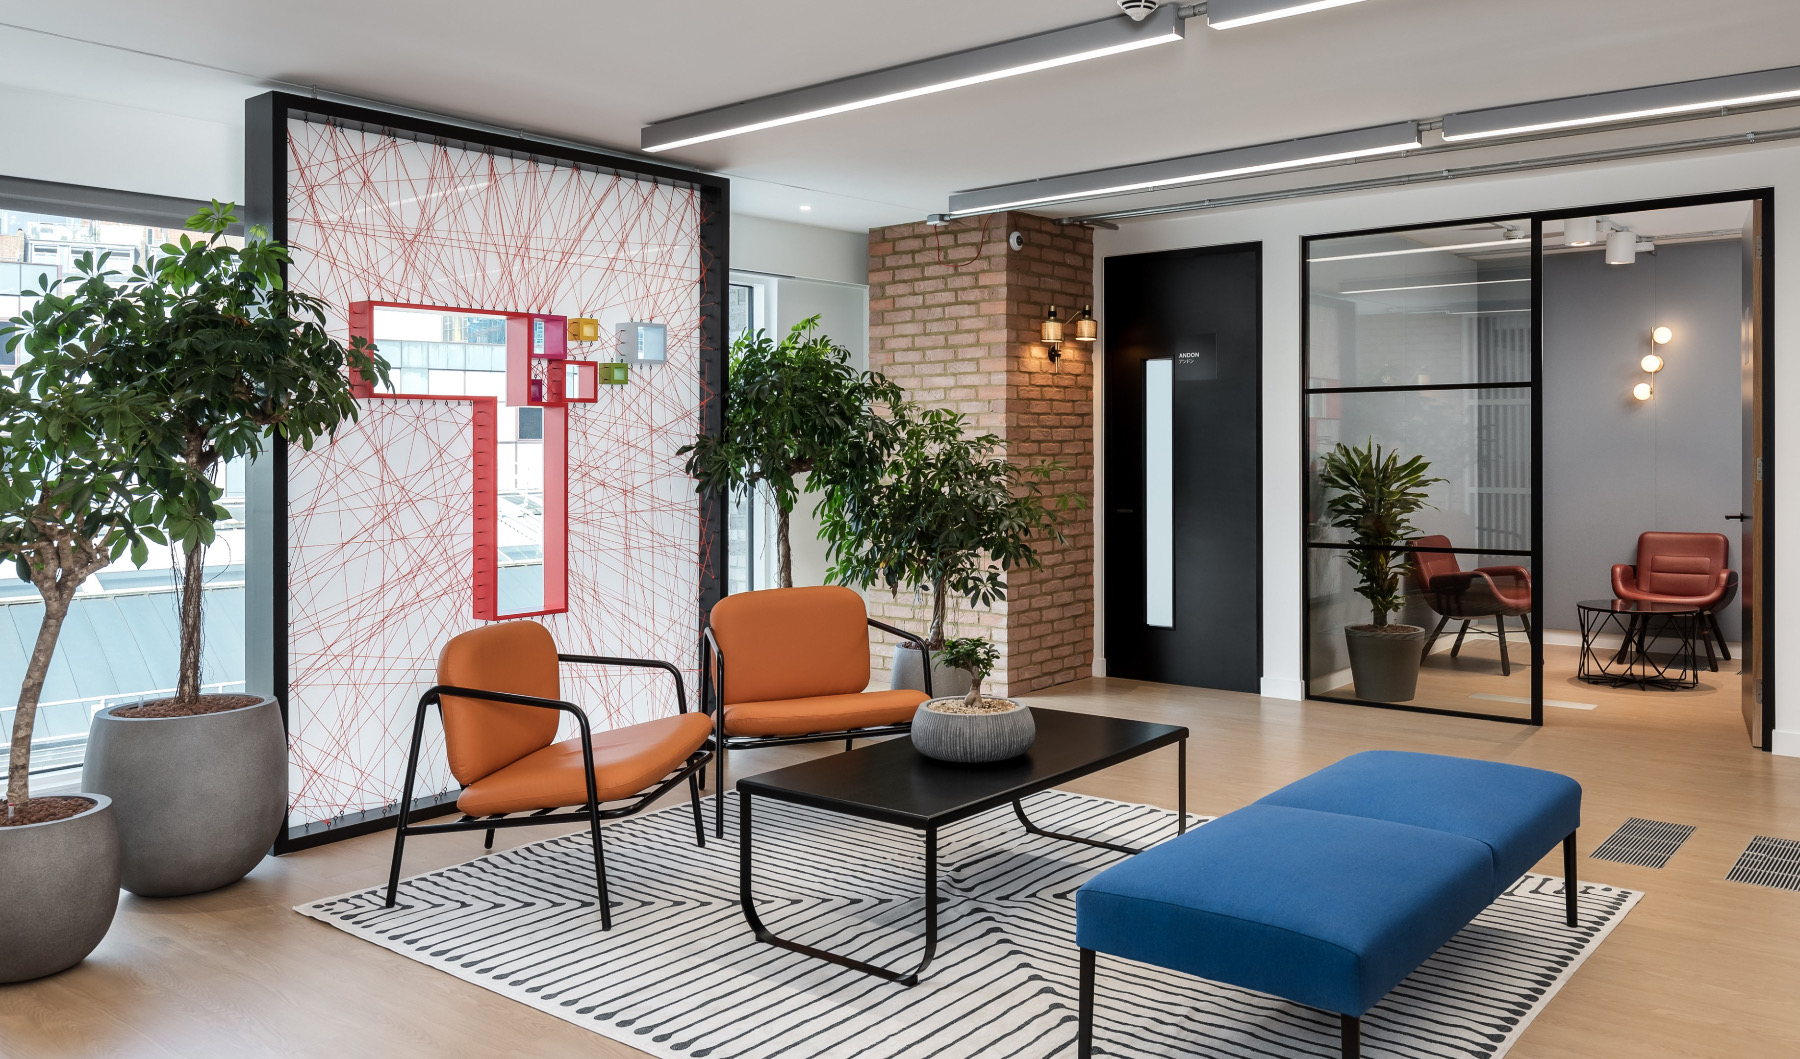 A Look Inside Toyota Connected’s New London Office